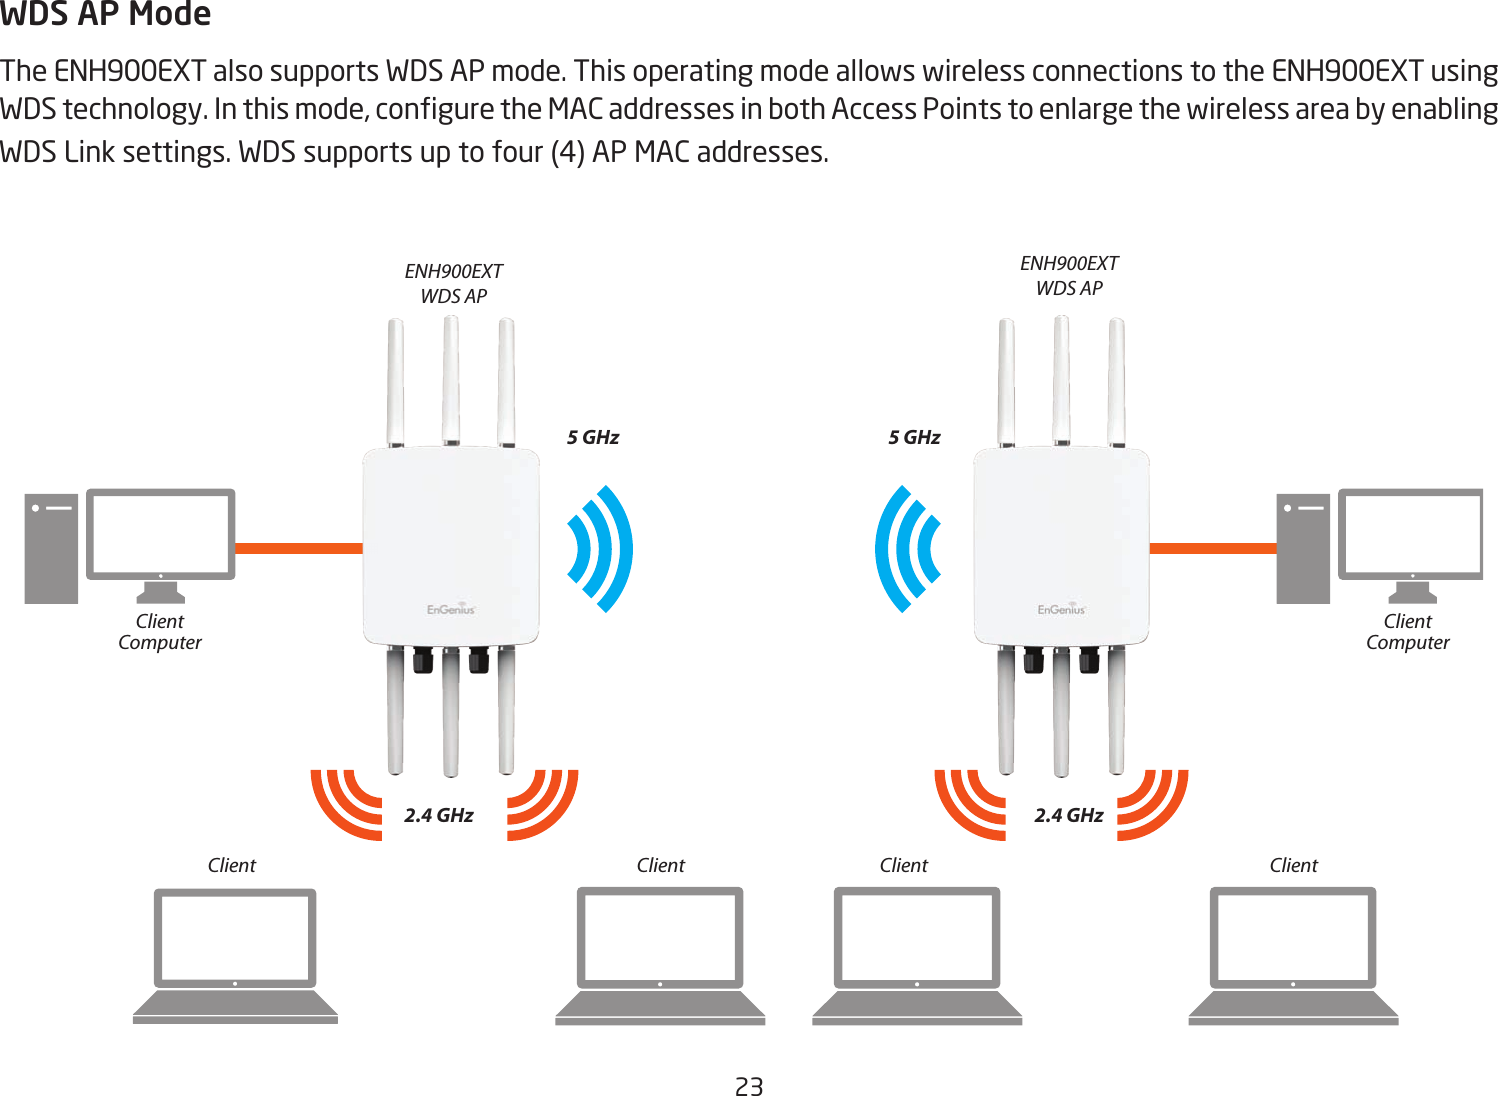 23WDS AP ModeThe ENH900EXT also supports WDS AP mode. This operating mode allows wireless connections to the ENH900EXT using WDStechnology.Inthismode,conguretheMACaddressesinbothAccessPointstoenlargethewirelessareabyenablingWDS Link settings. WDS supports up to four (4) AP MAC addresses.ENH900EXTWDS APENH900EXTWDS AP2.4 GHz 2.4 GHz5 GHz 5 GHzClient Client Client ClientClientComputerClientComputer